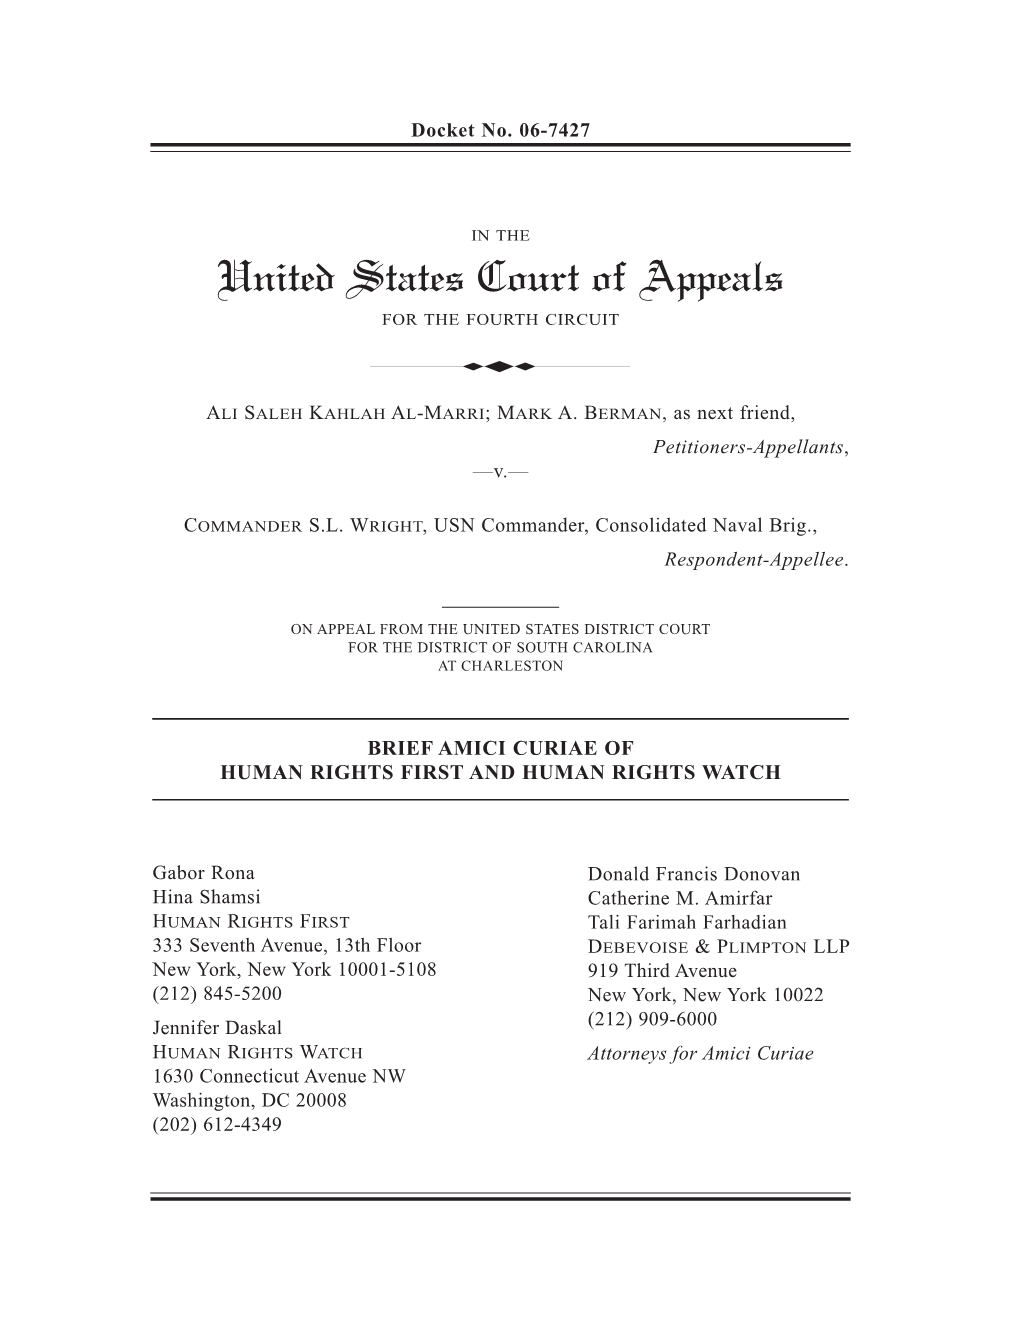 United States Court of Appeals for the FOURTH CIRCUIT